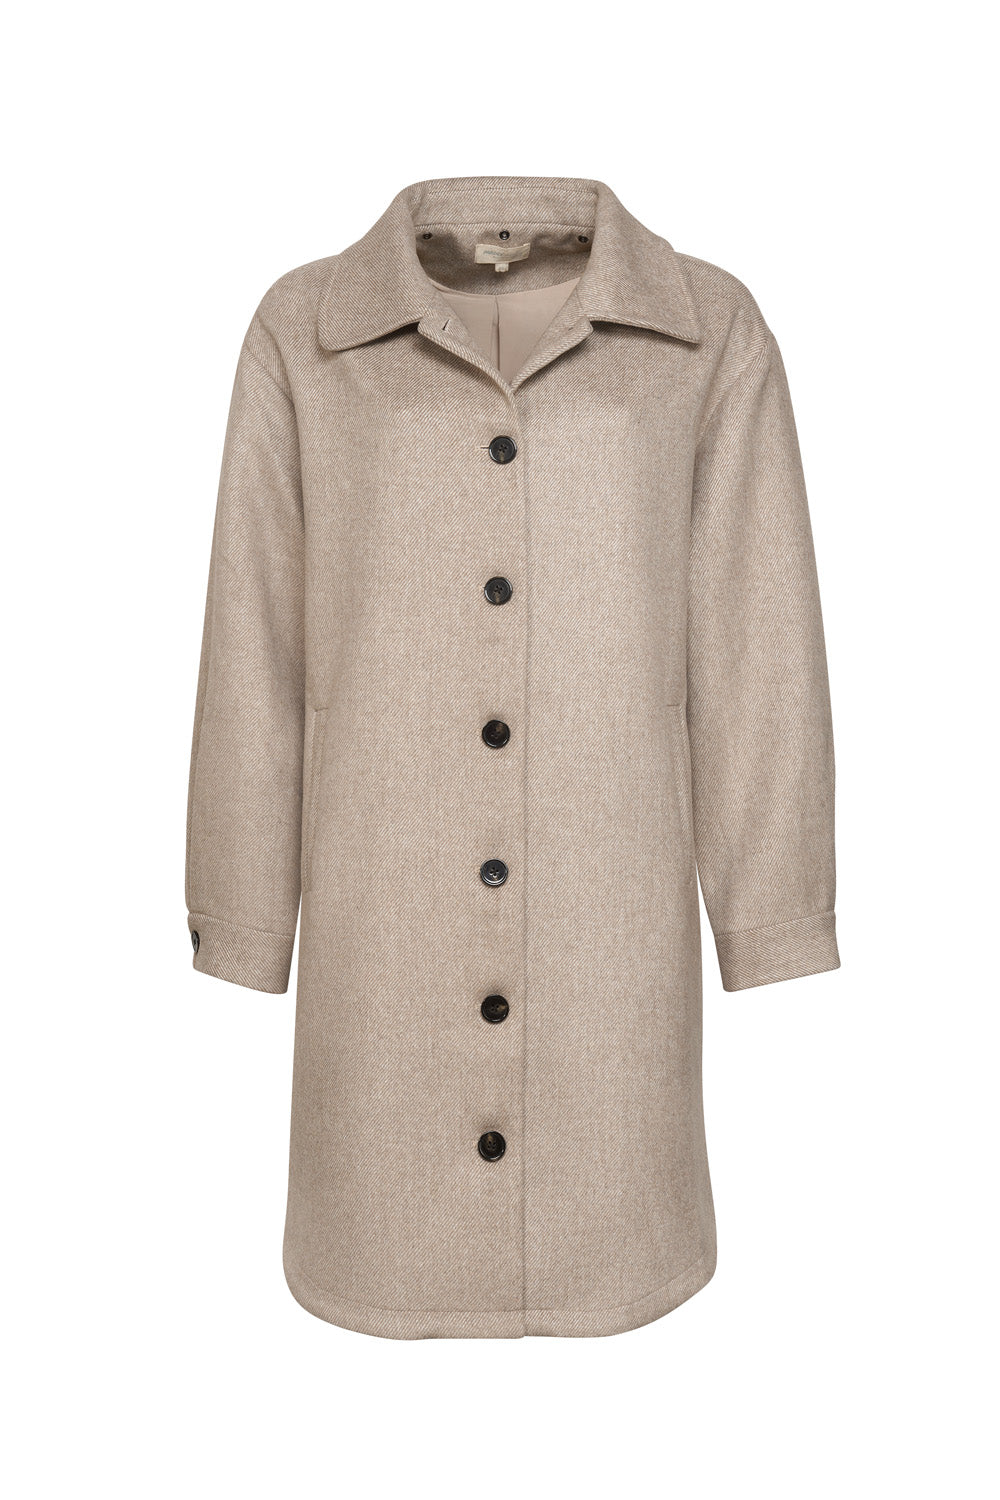 MADLY SWEETLY SUPREME COAT - STONE - THE VOGUE STORE